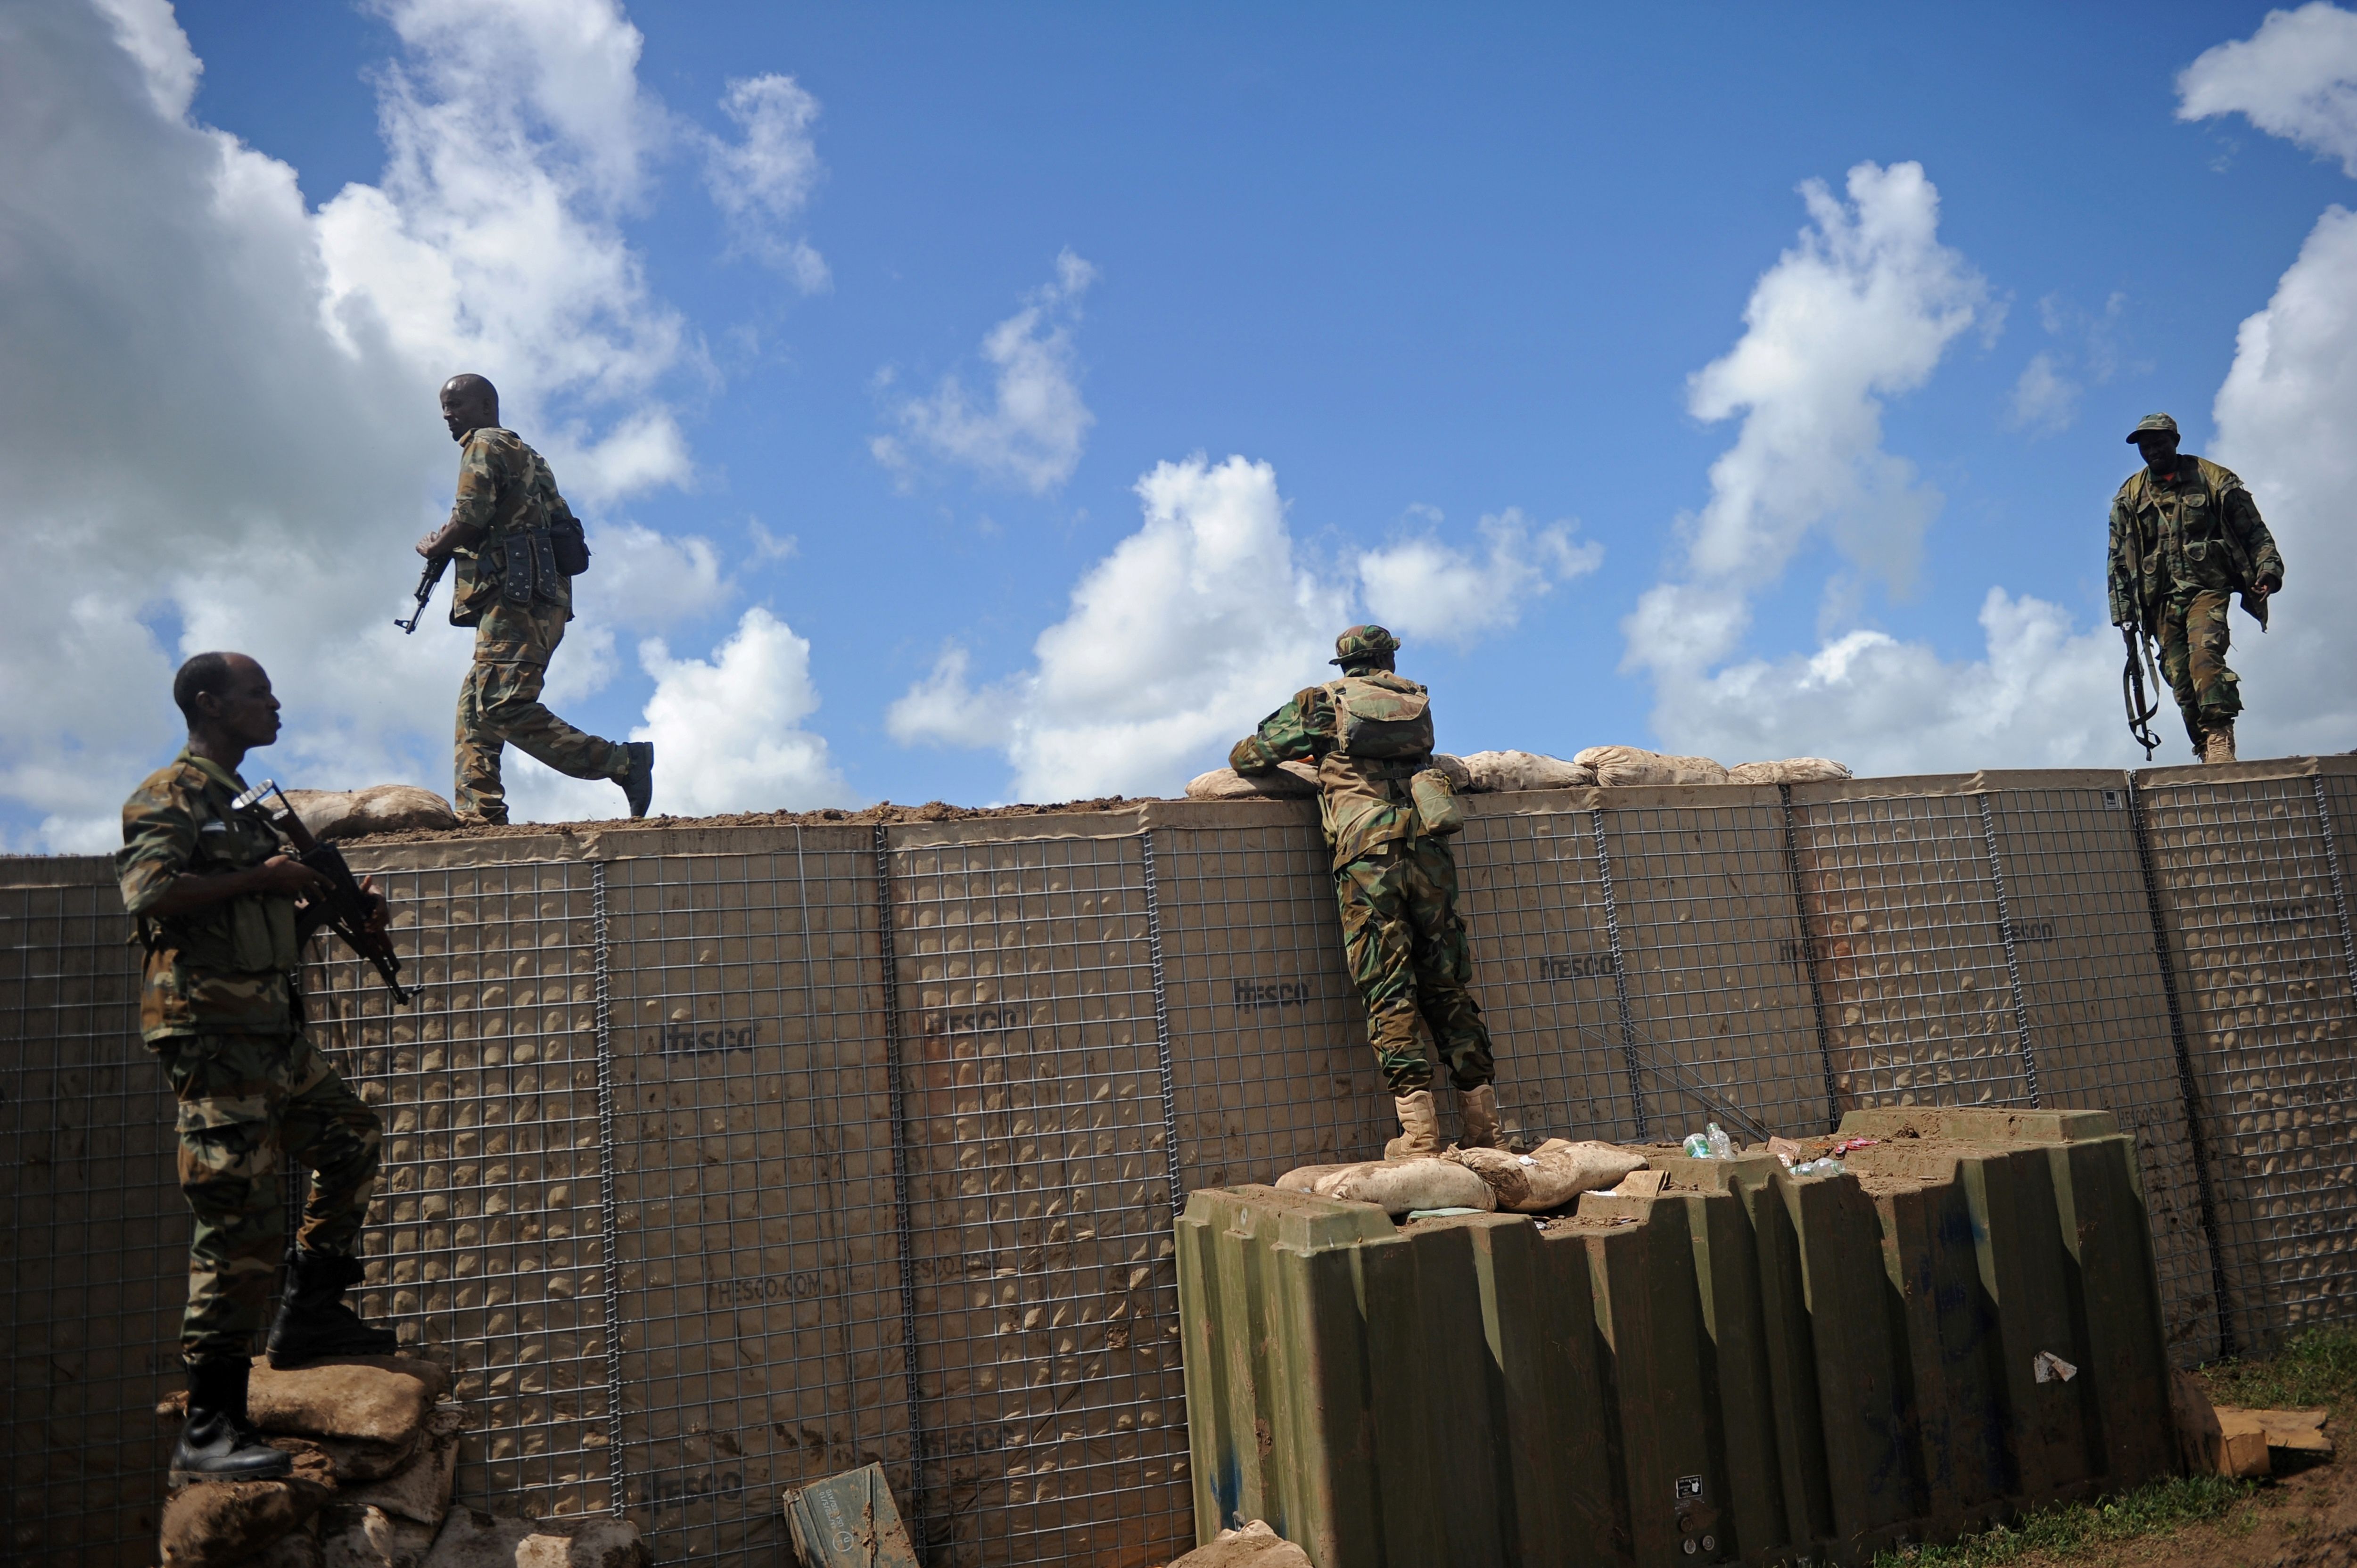 Soldiers atop a barricade wall.